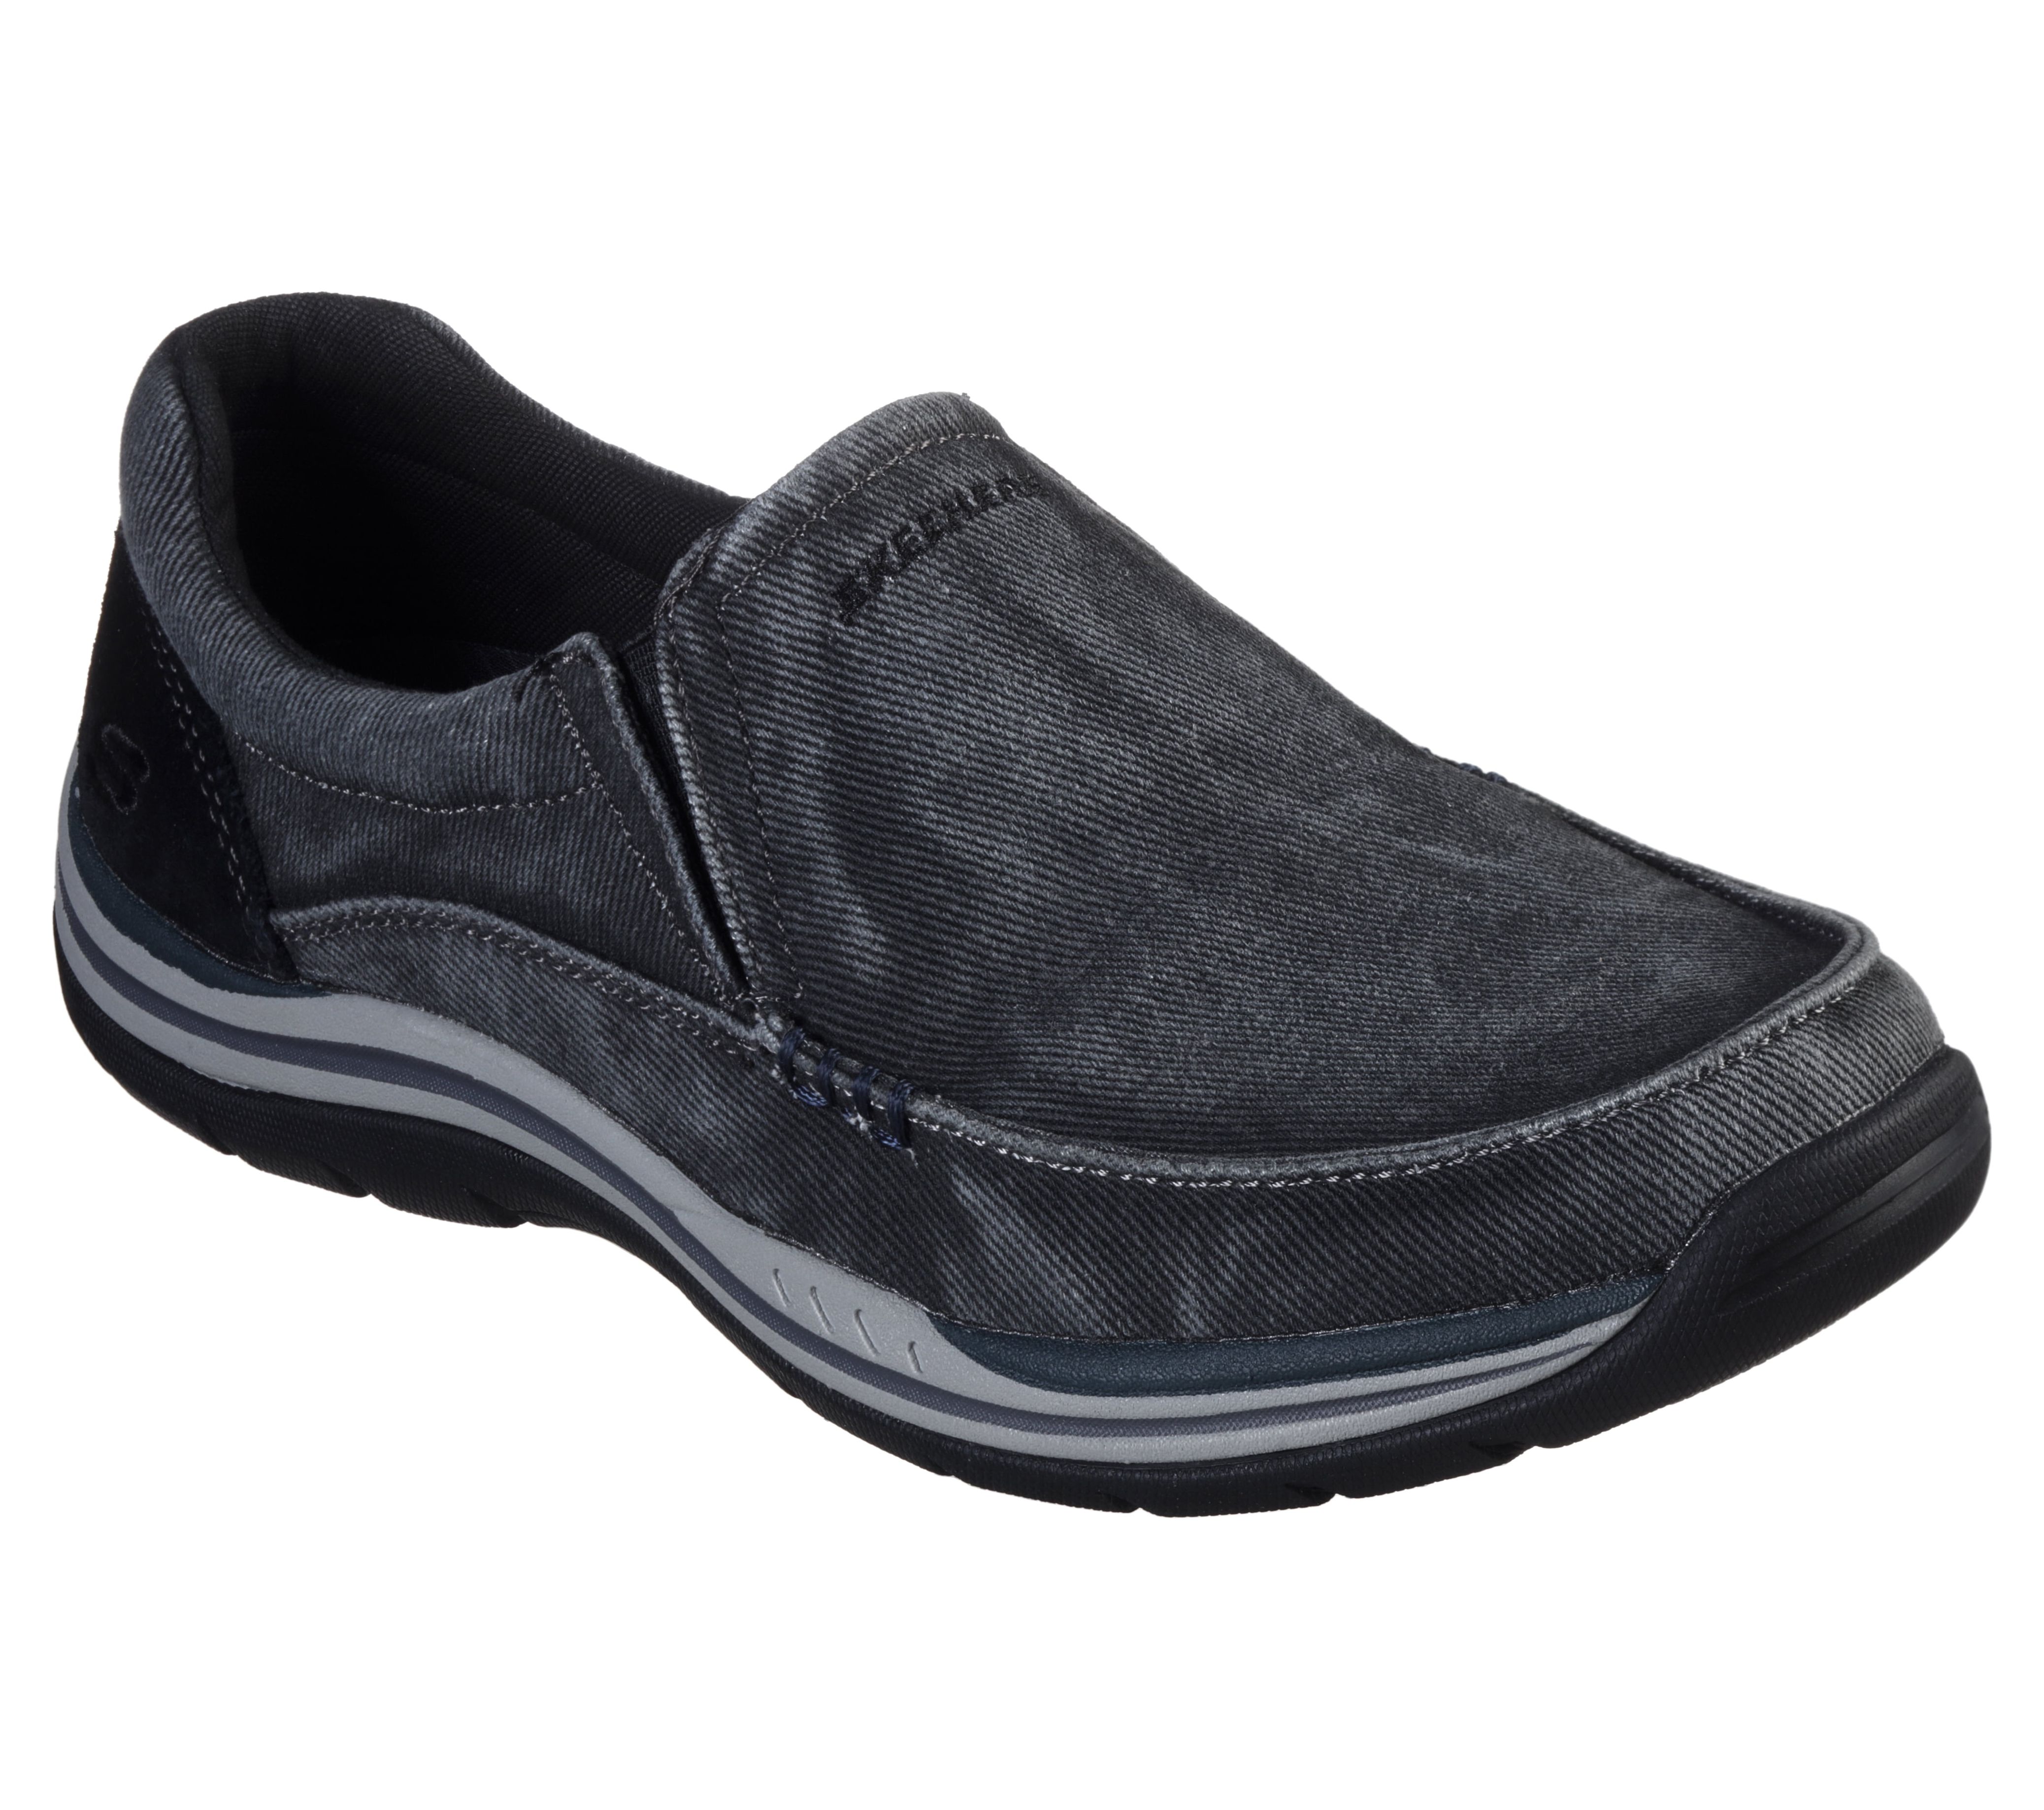 Skechers Men's Relaxed Fit Expected Avillo Casual Slip-on Shoe (Wide Width Available) - image 1 of 7